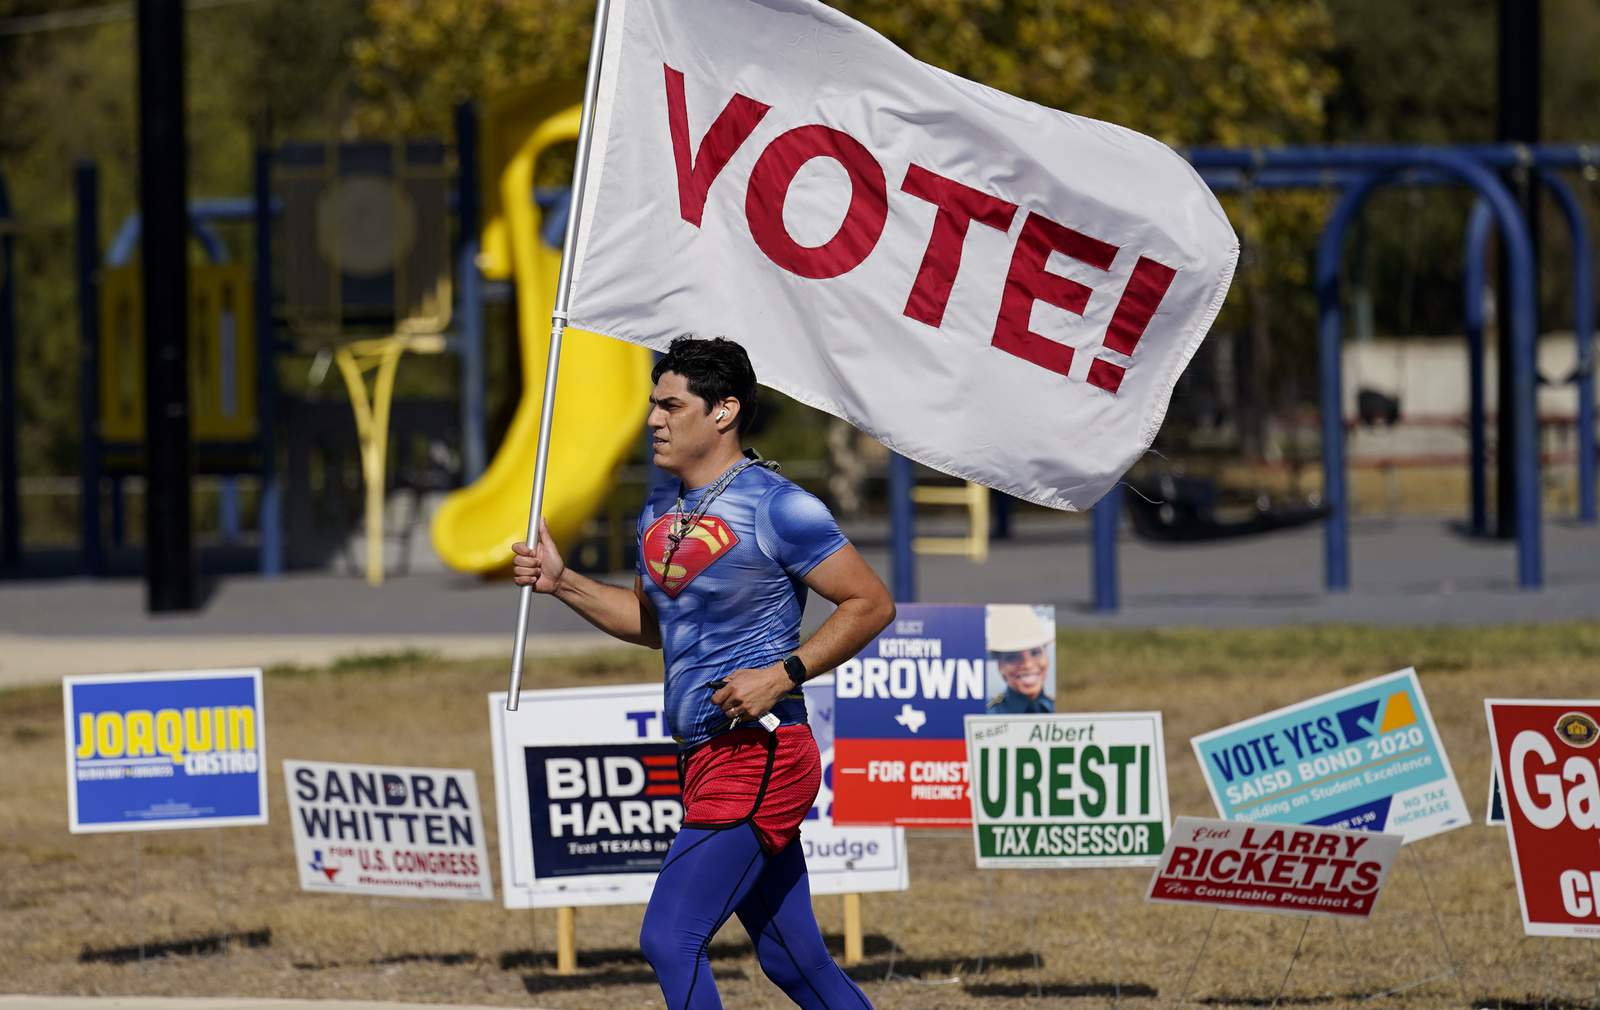 LIVE COVERAGE: Updates from post-Election Day 2020 in San Antonio, Bexar County, Texas